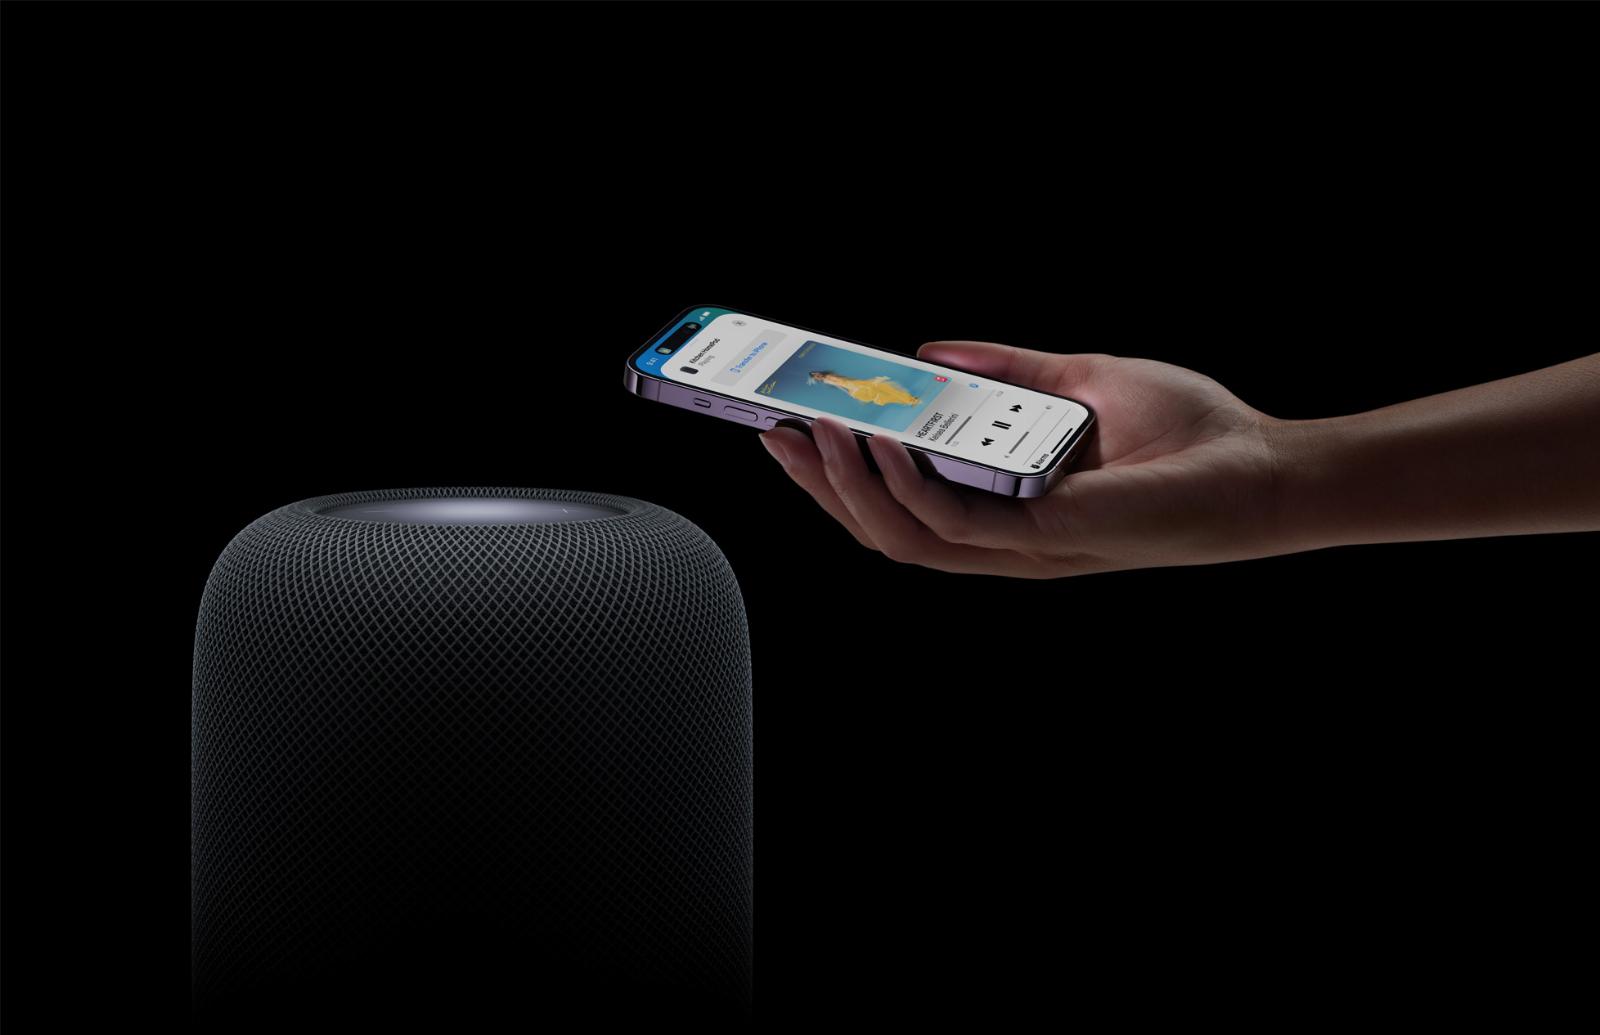 Some initial thoughts on Apple’s resurrected HomePod